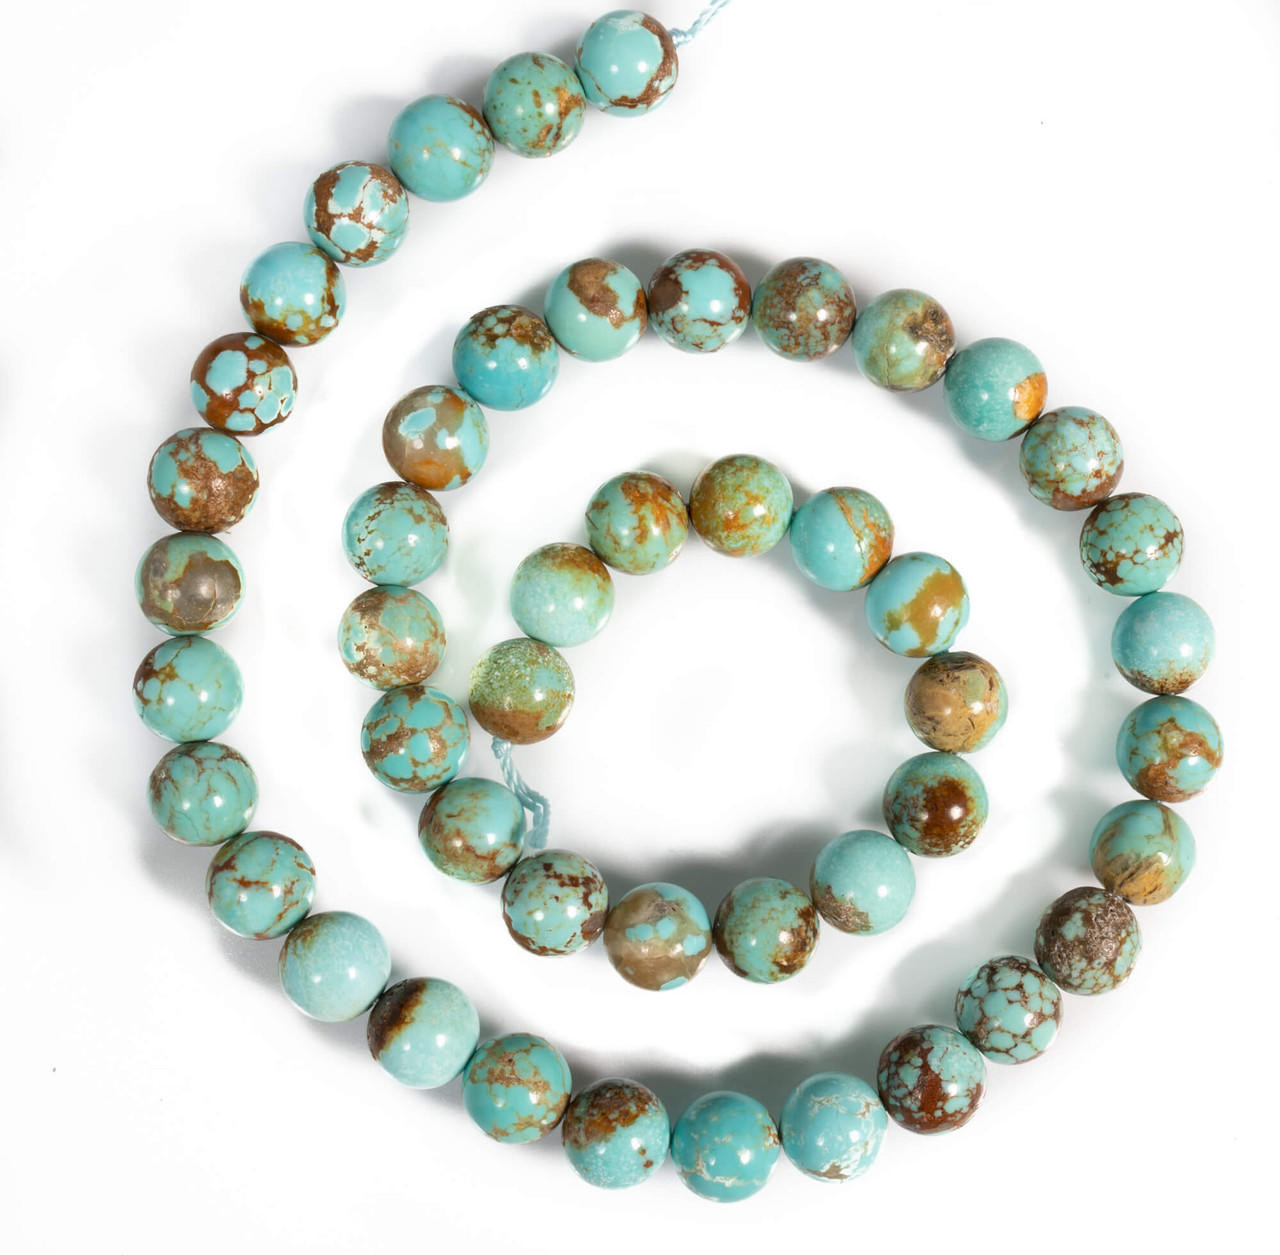 Turquoise Beads Number Eight Mine(Nevada) 8mm Rds   NE8m1 